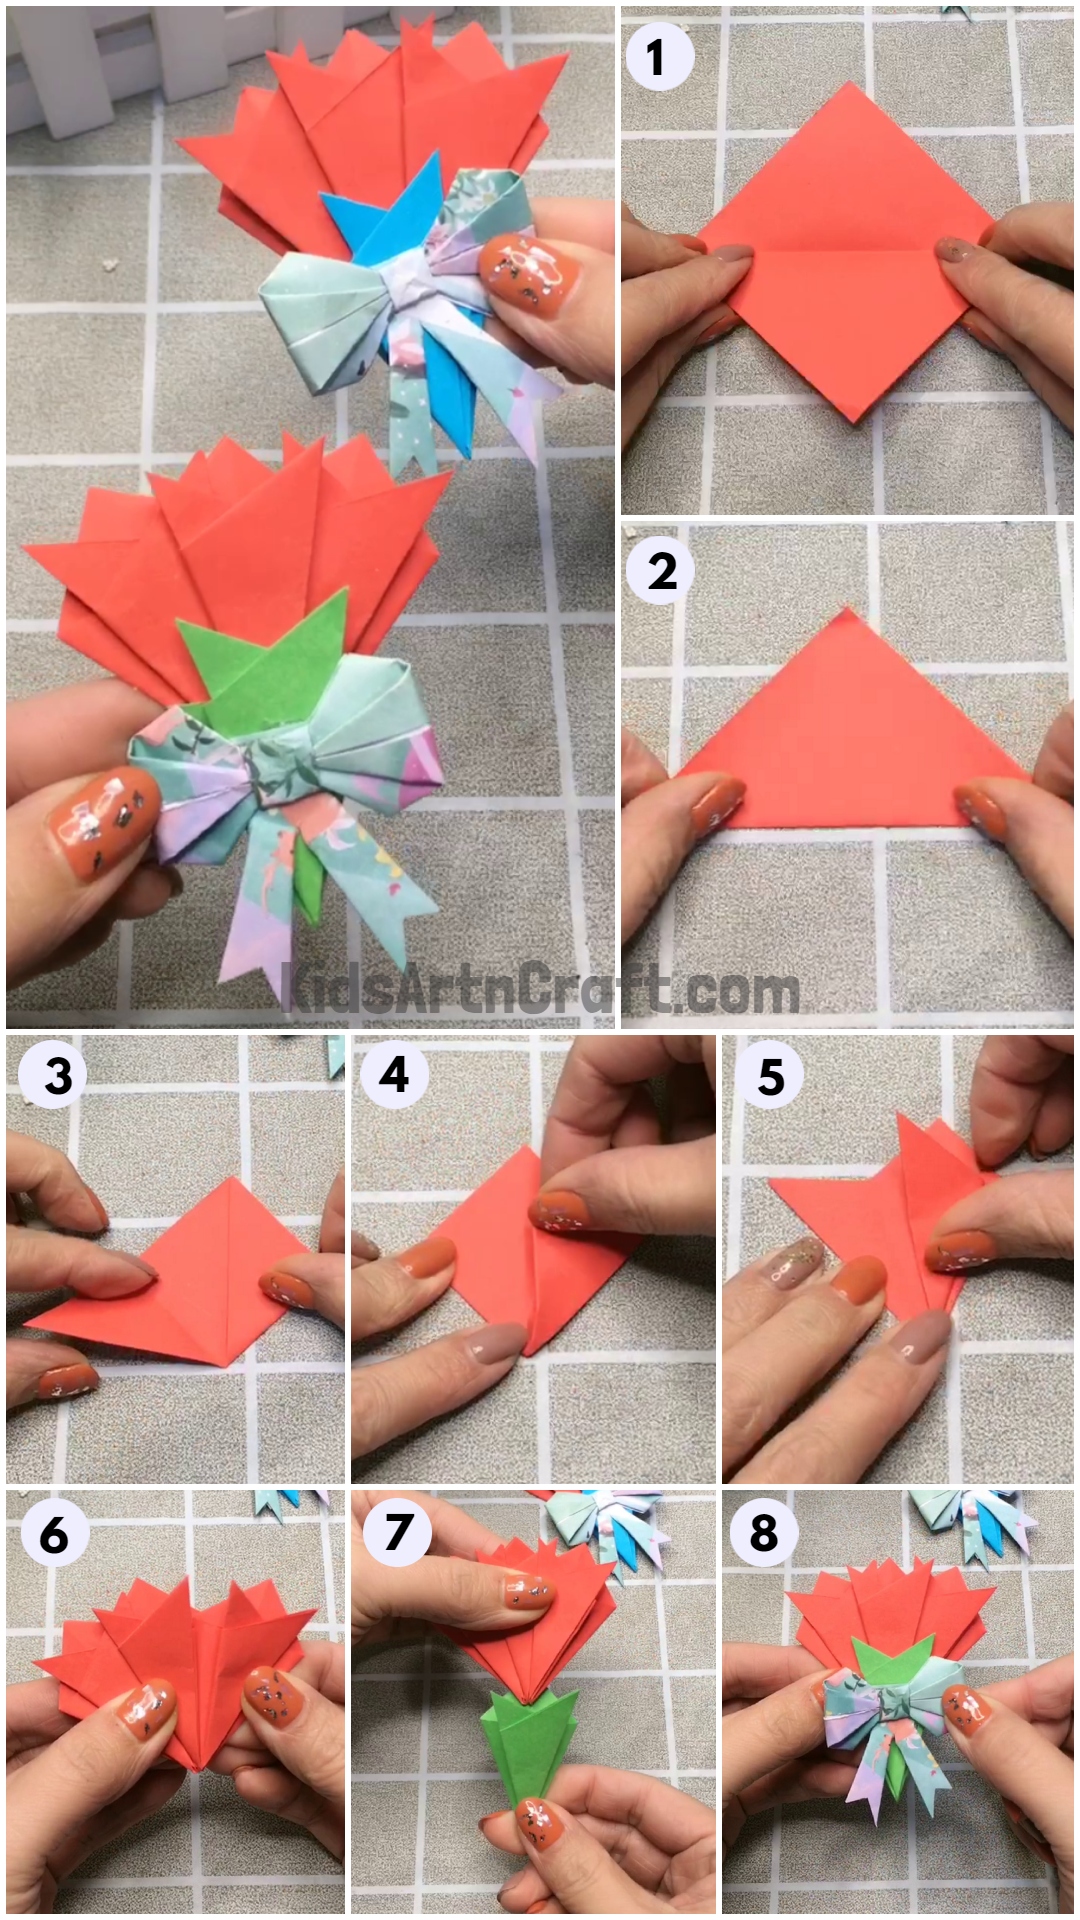 How Do You Make A Beautiful Bouquet With Paper?